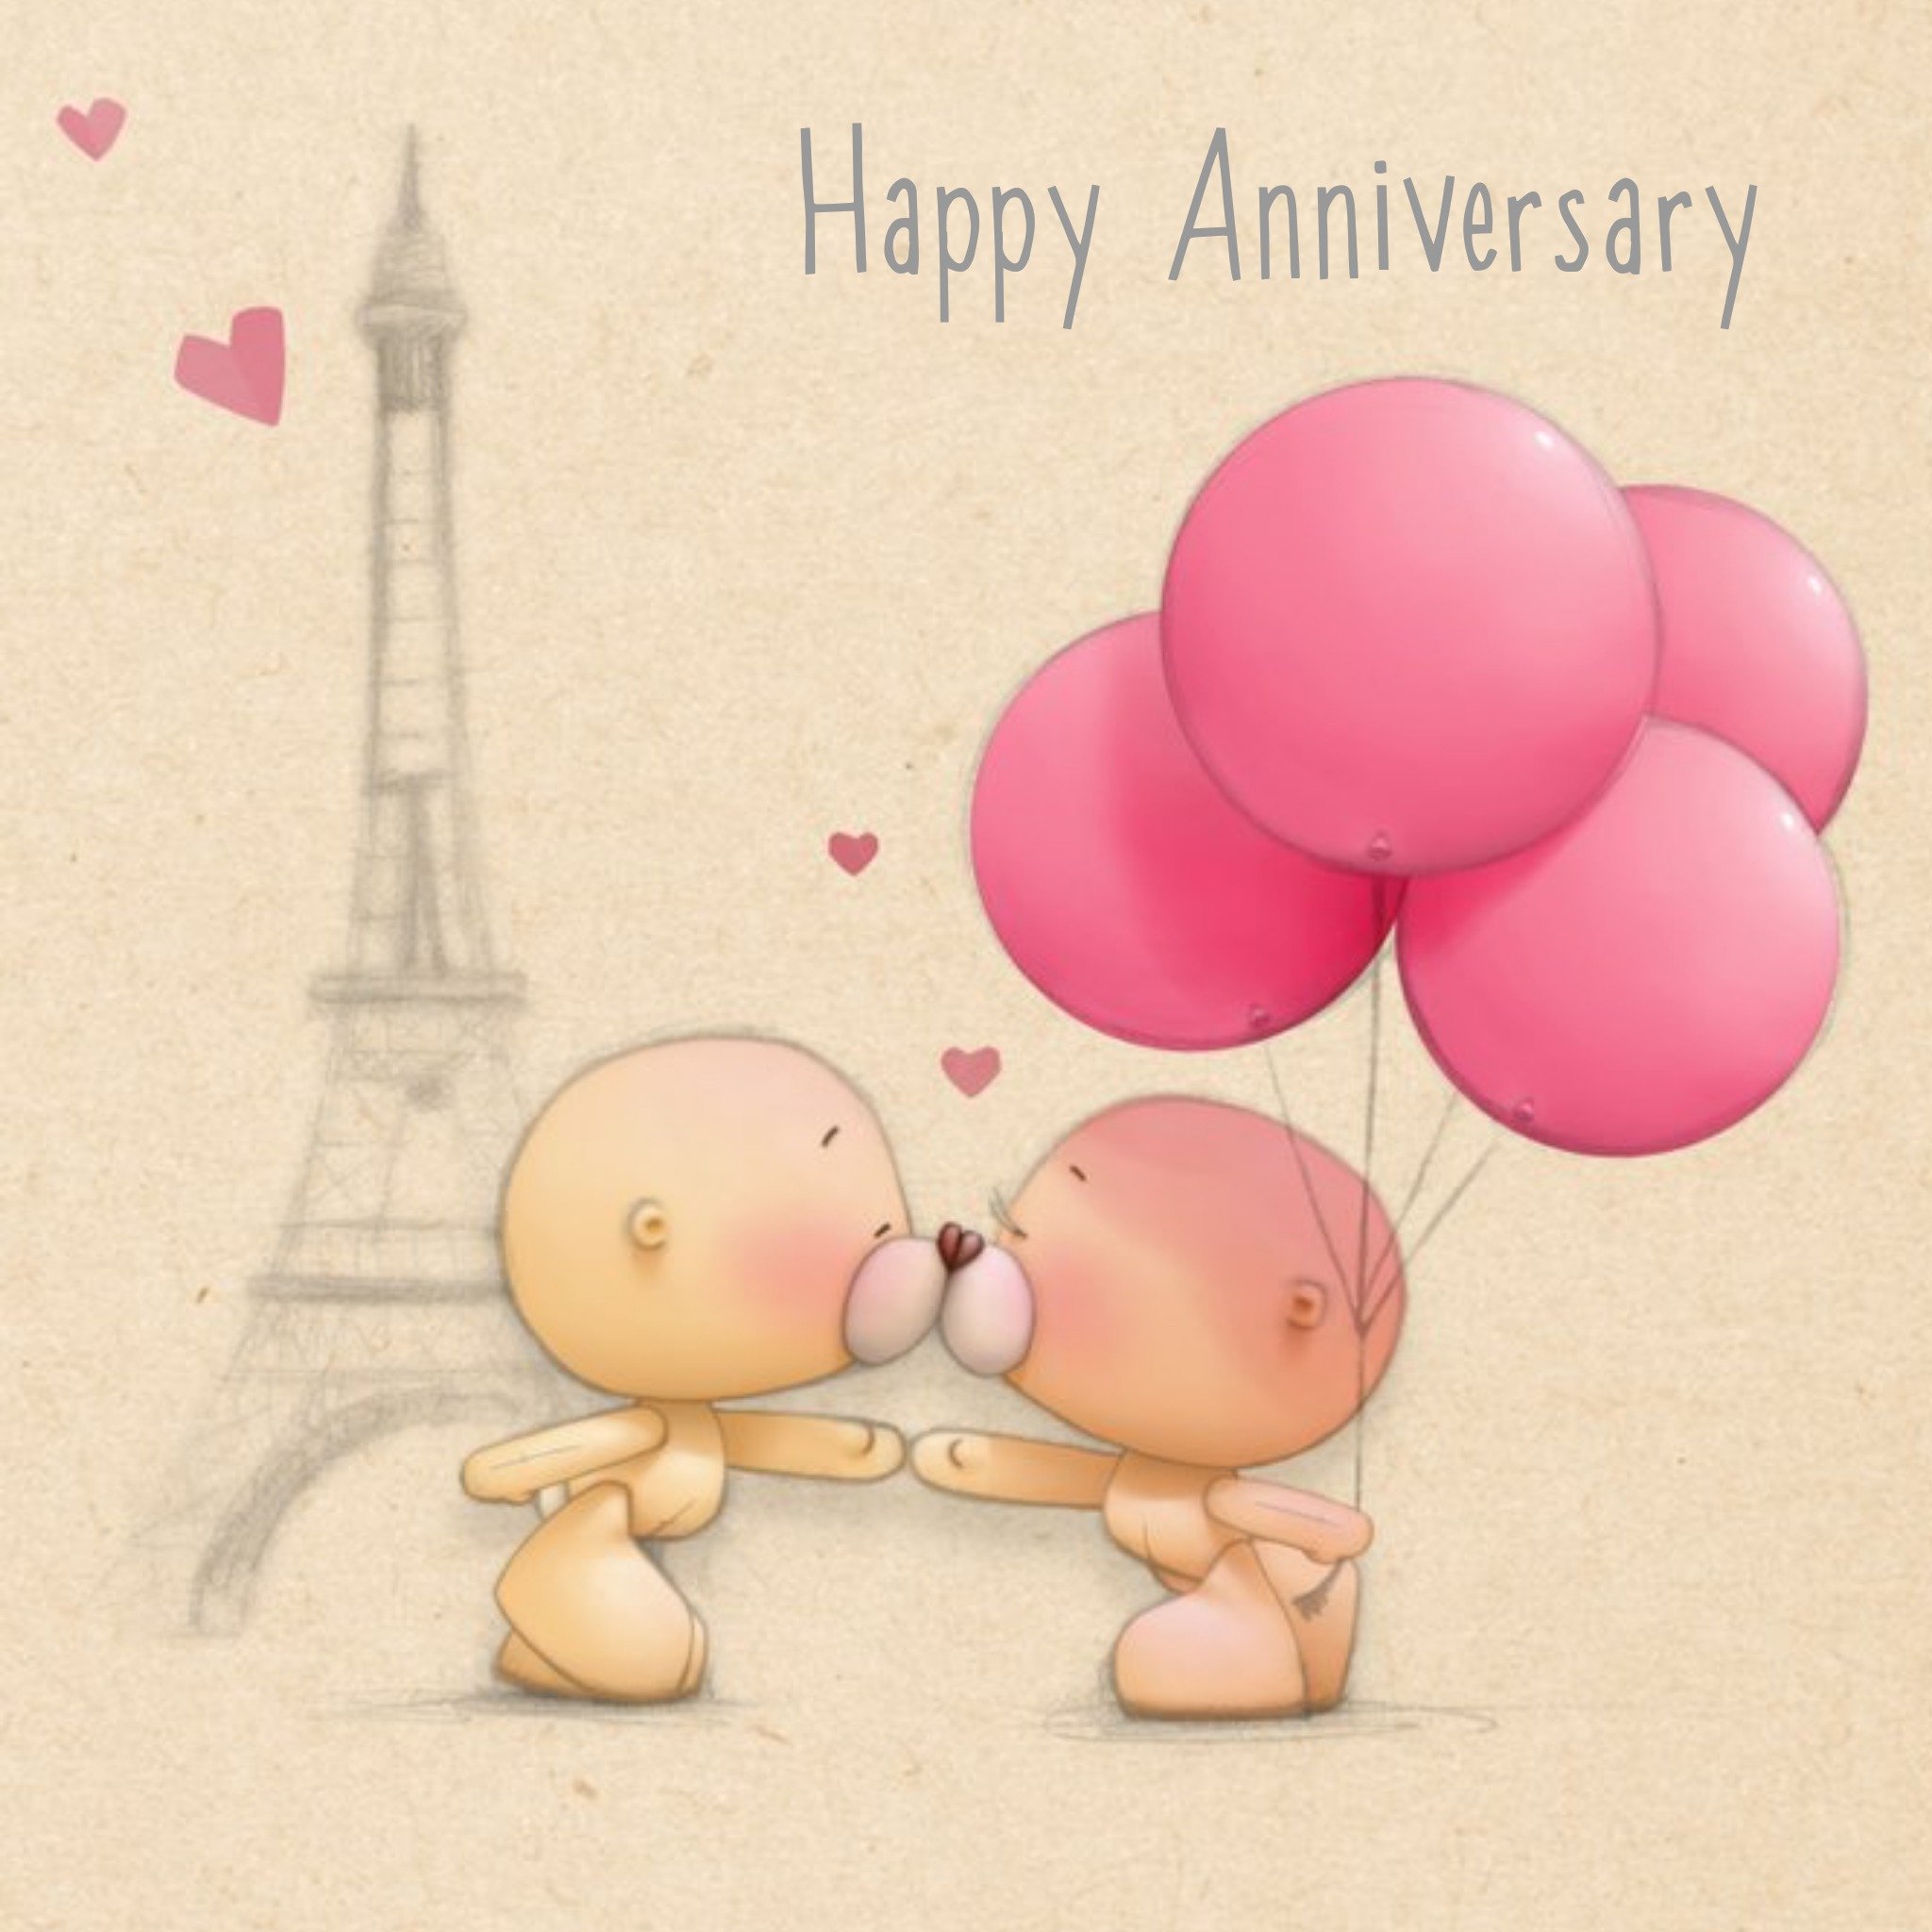 Moonpig Bear With Balloons At Eiffel Tower Personalised Happy Anniversary Card, Large